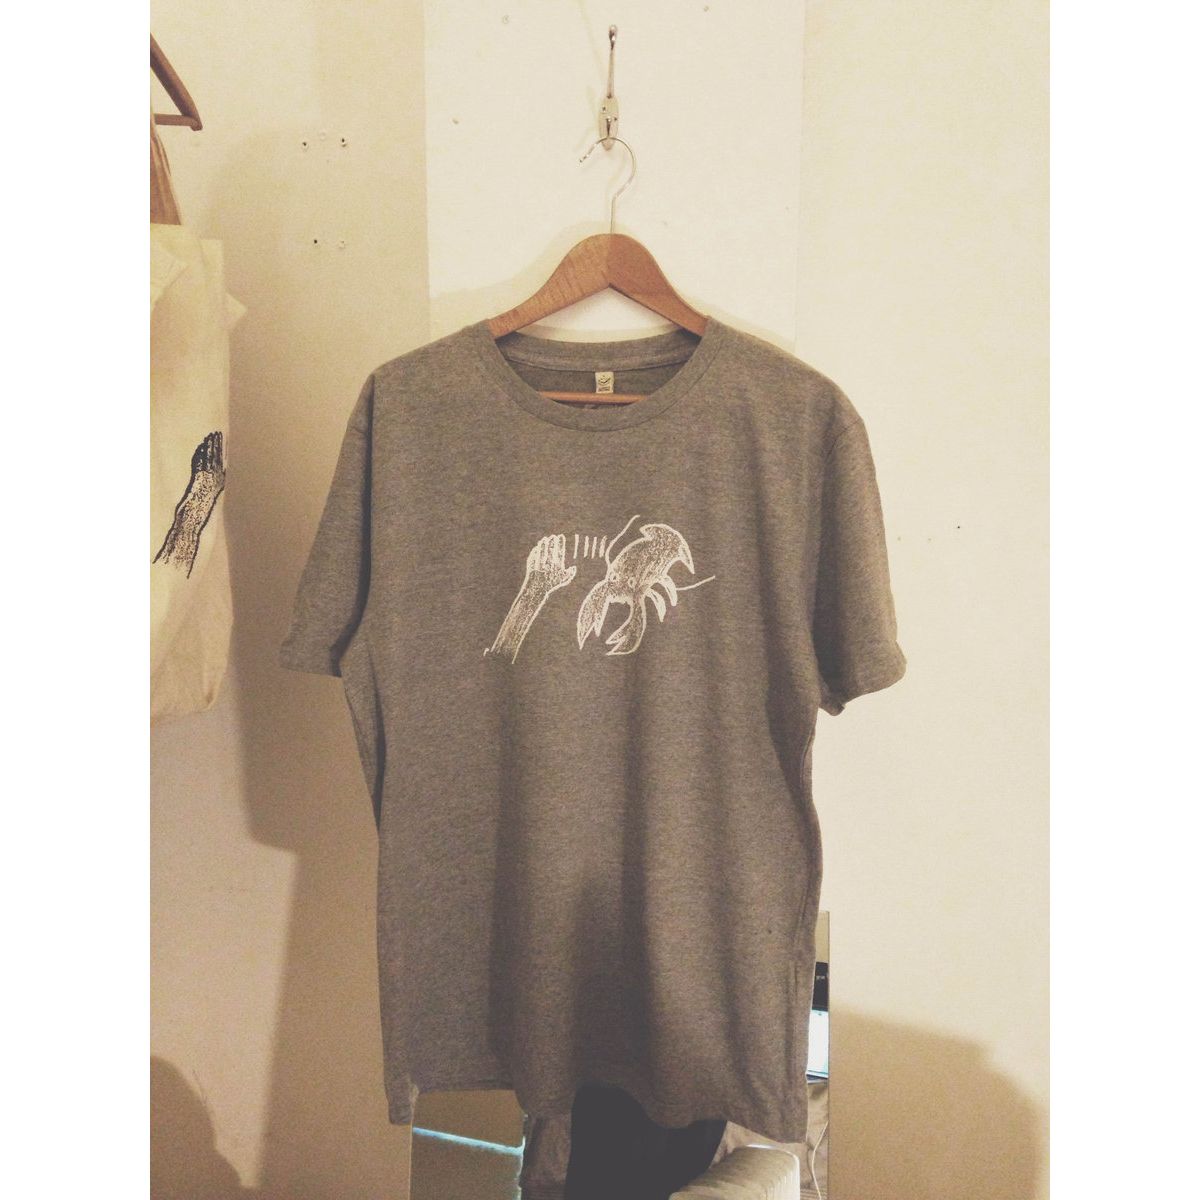 LOBSTER THEREMIN / LOBSTER THEREMIN LOGO T-SHIRT GREY SIZE:M